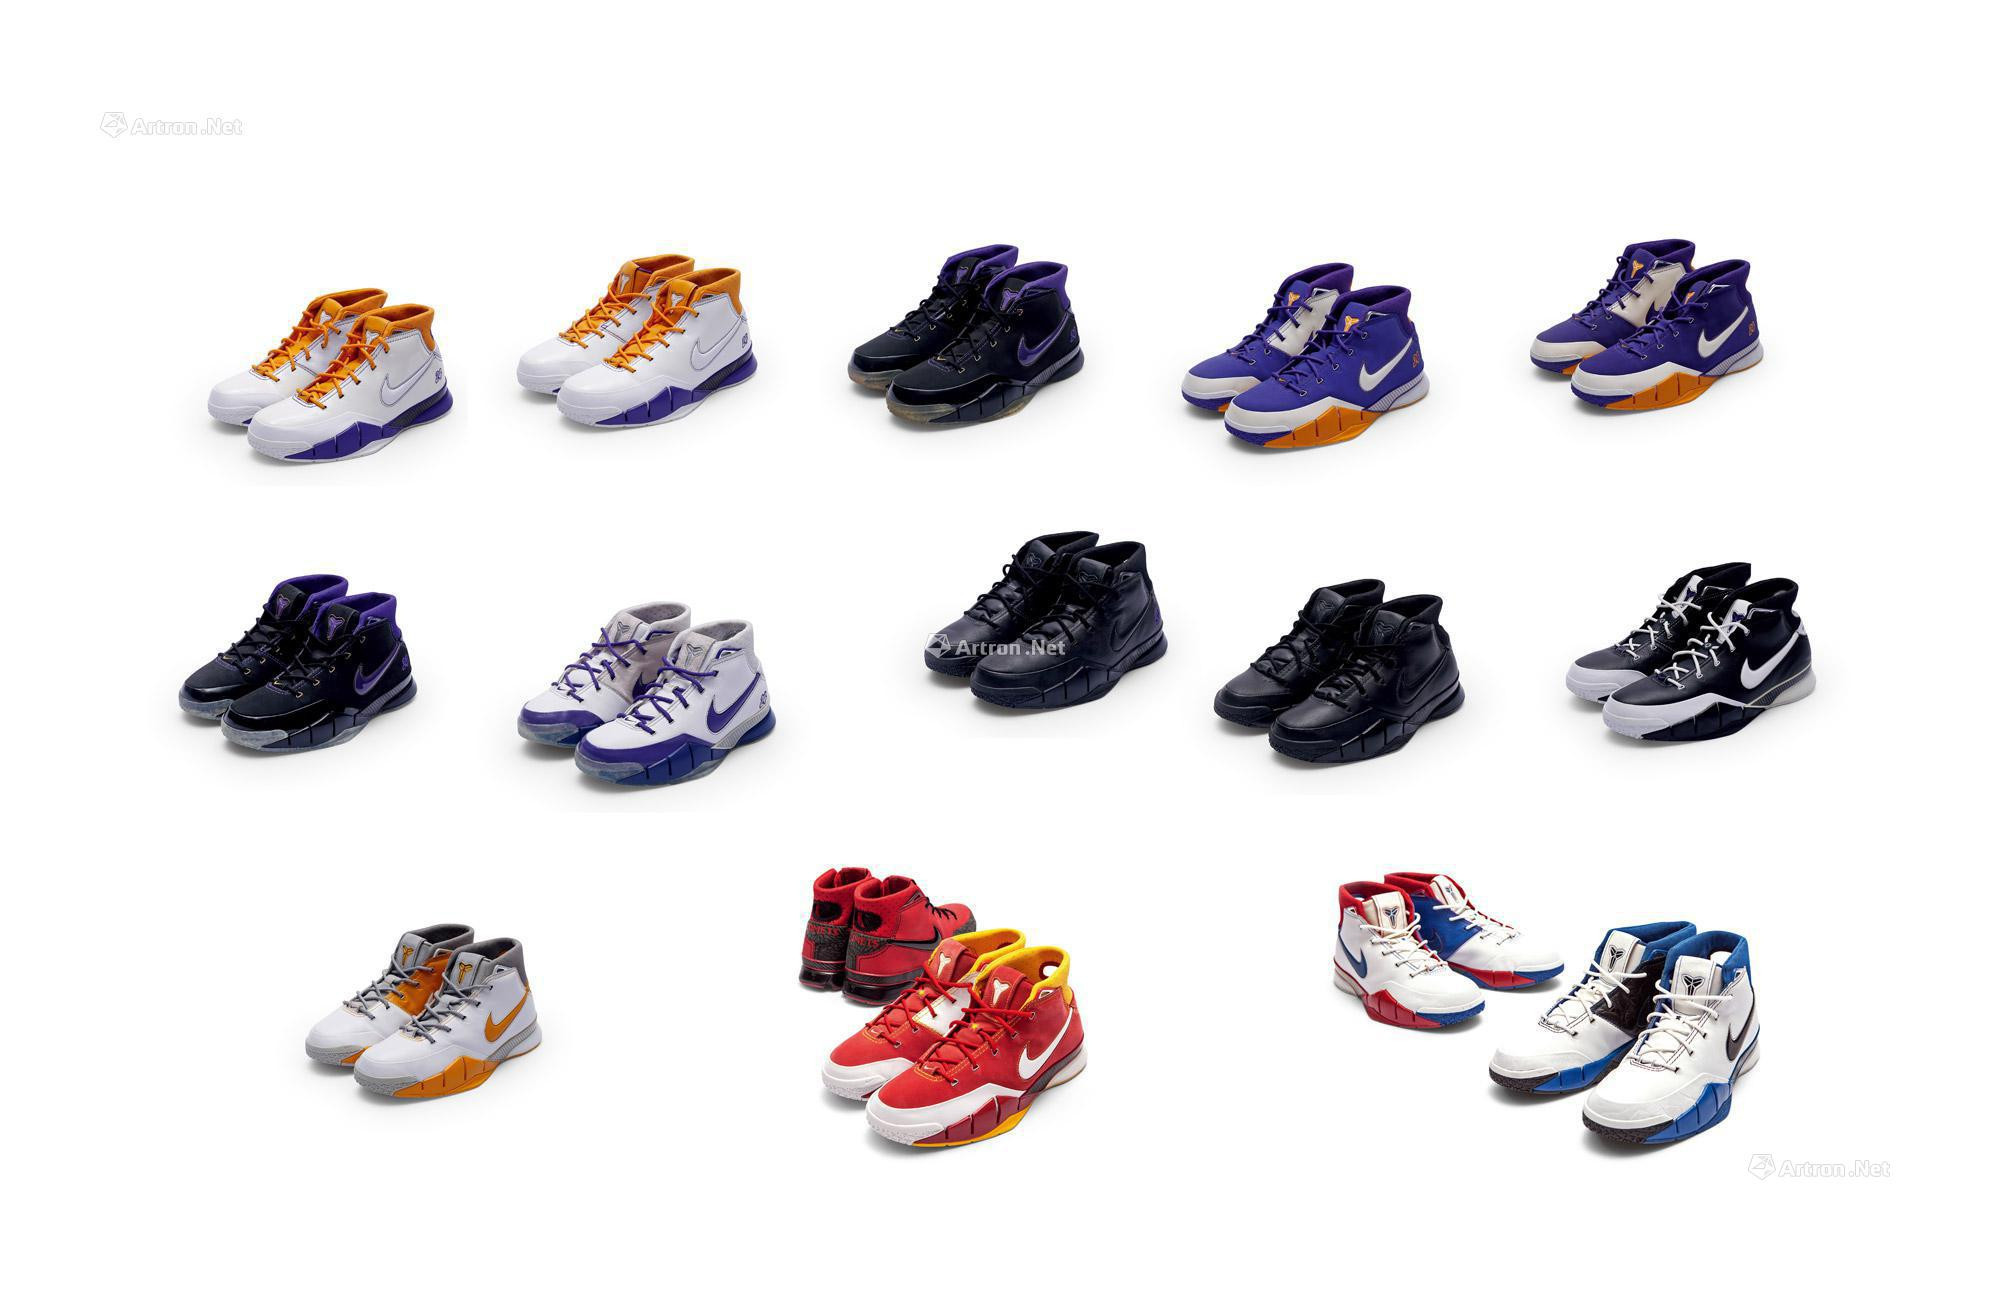 Nike Zoom Kobe I Signature Sneaker Collection  15 Pairs of Exclusive Sneakers